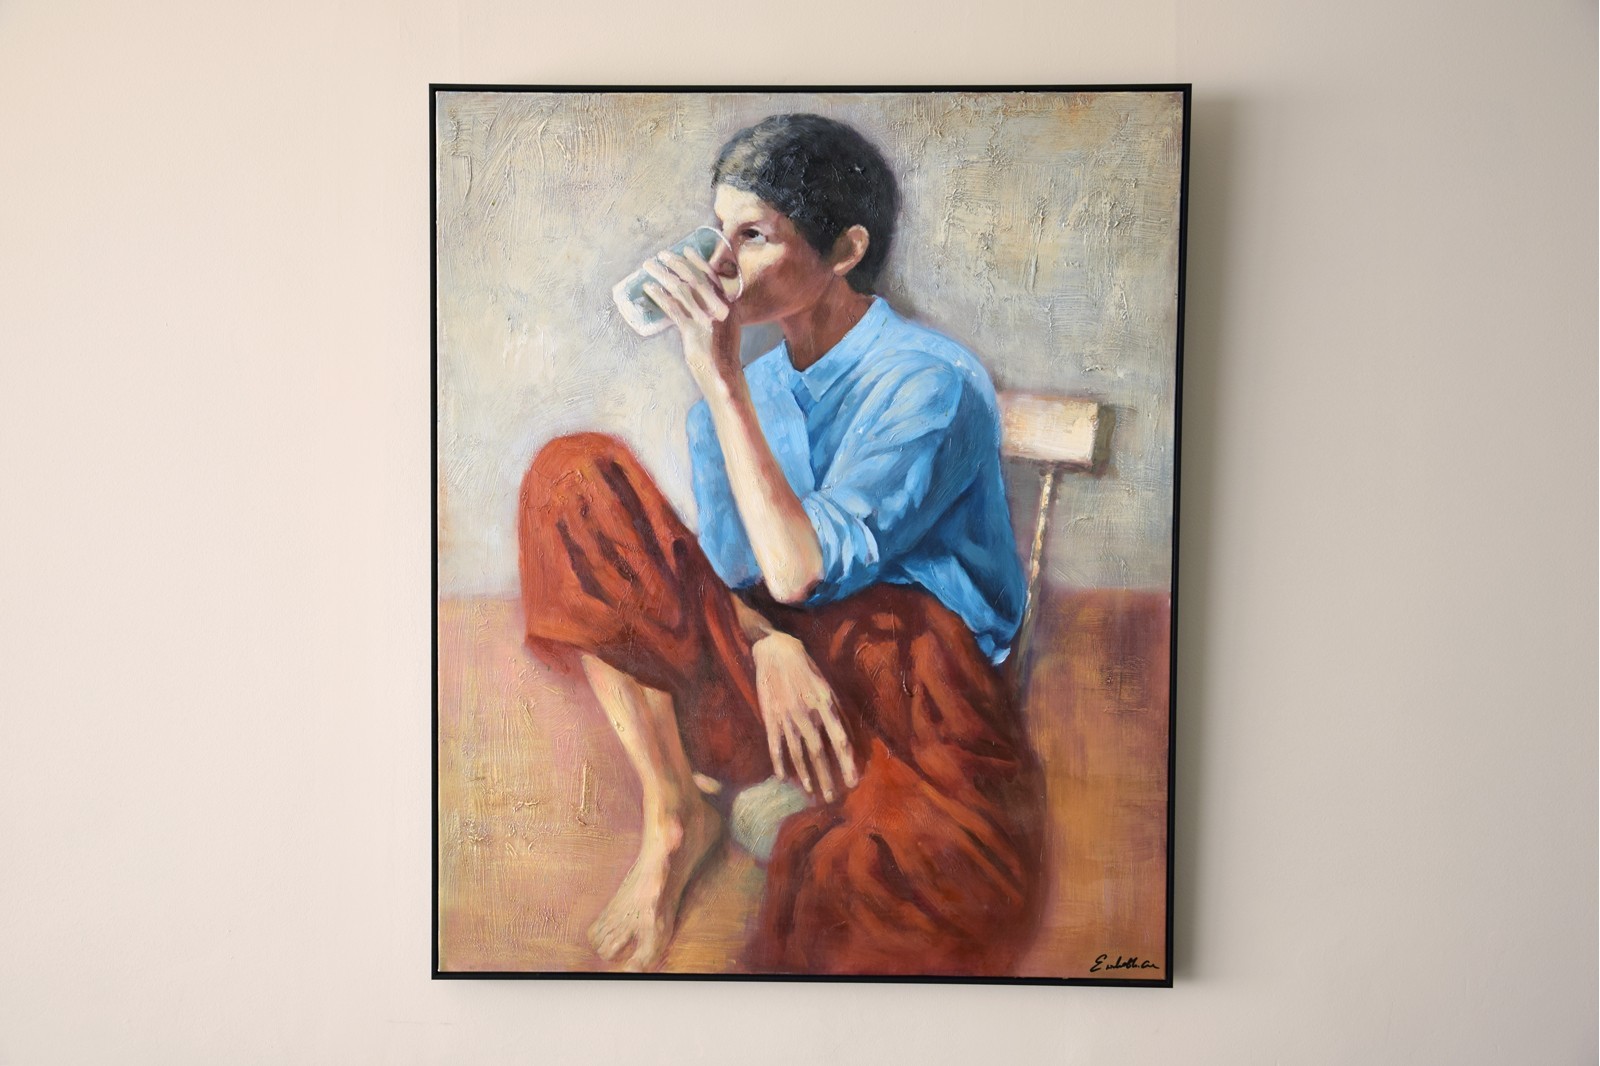 DECORATIVE PAINTING WOMAN N1 WITH FRAME